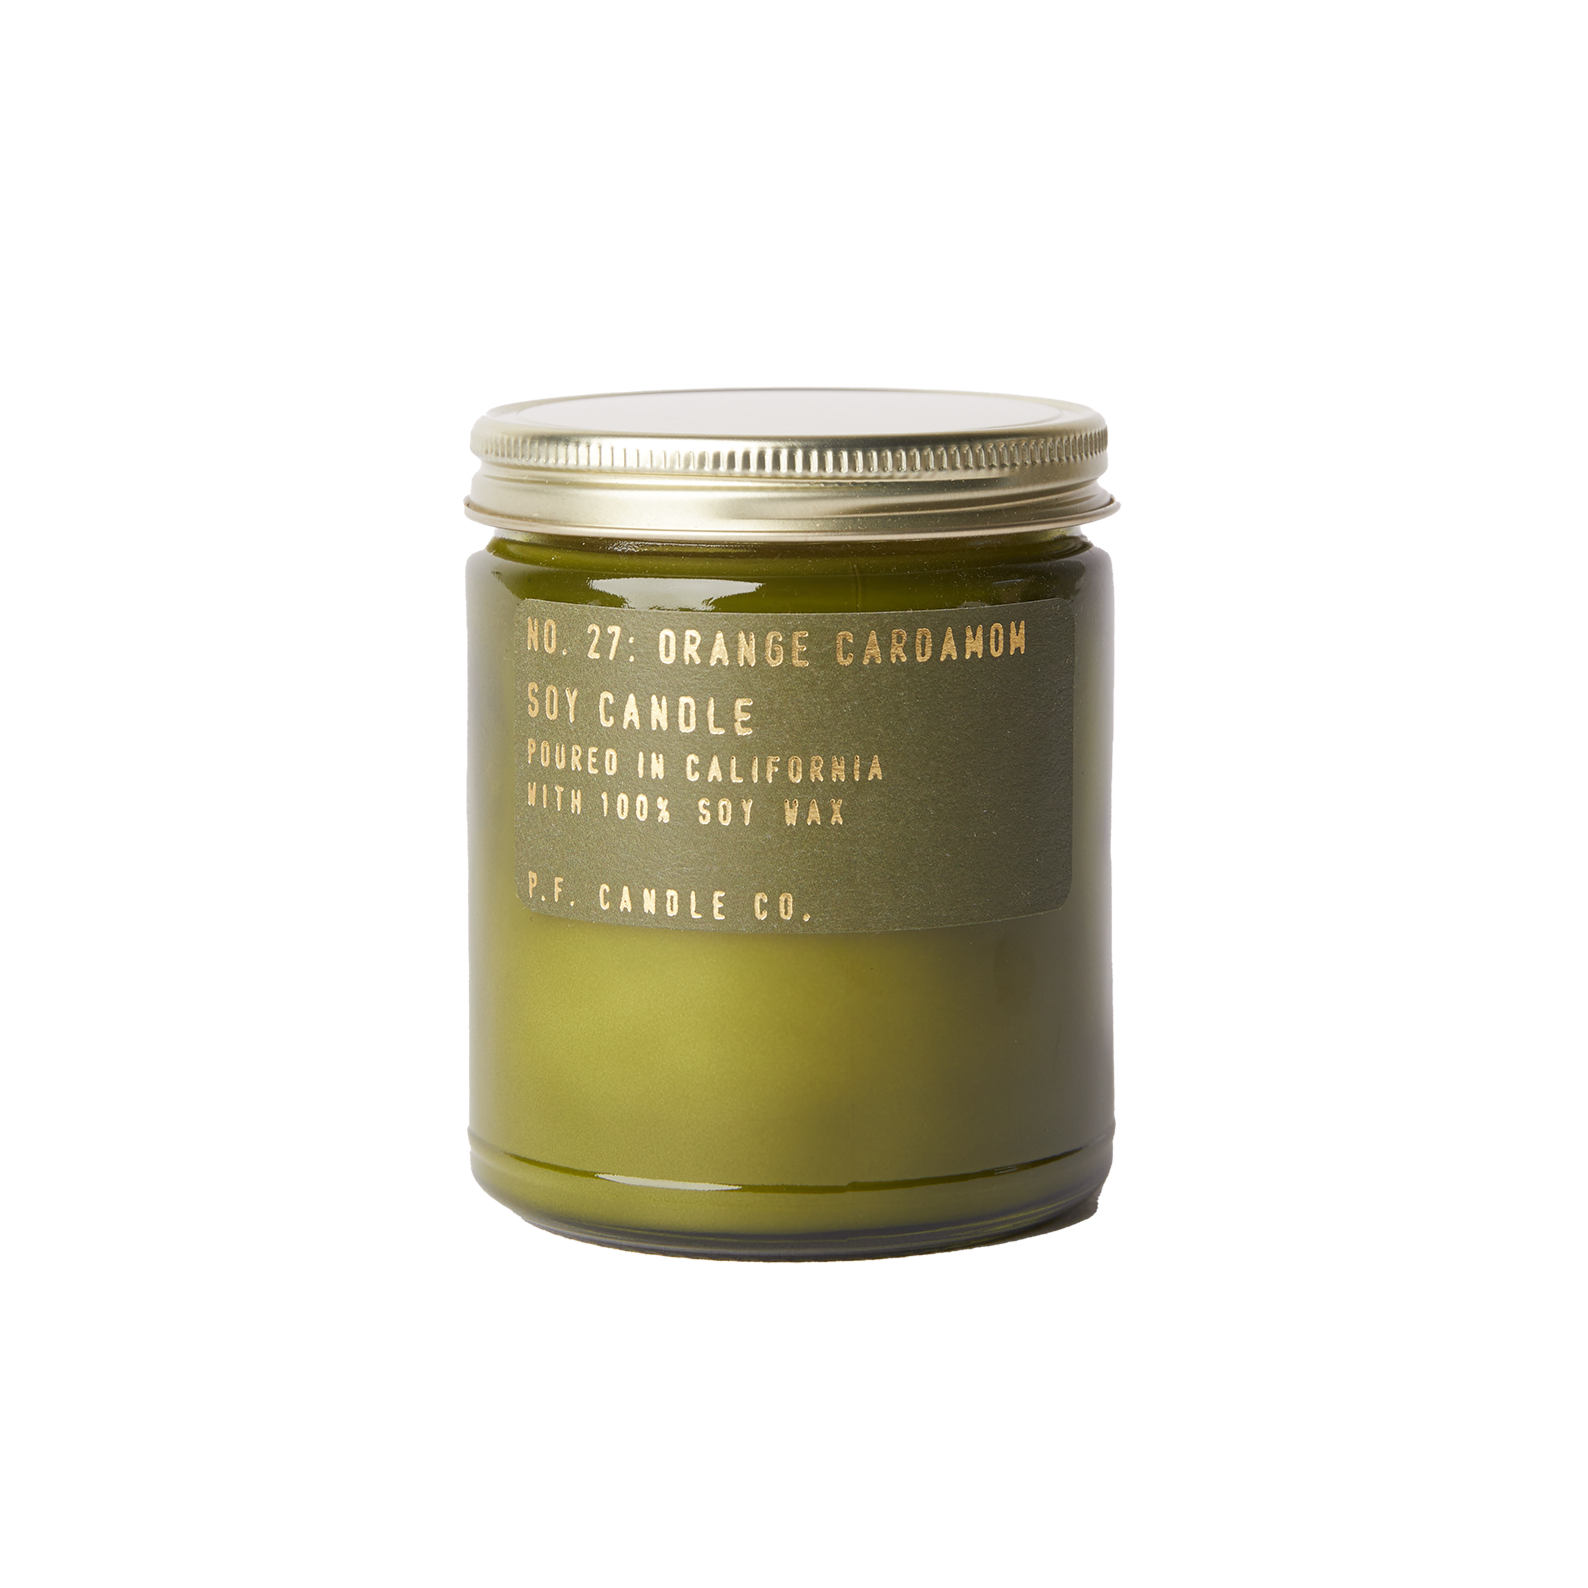 P.F. Candle Co No 27 Orange Cardamom Soy Wax Candle